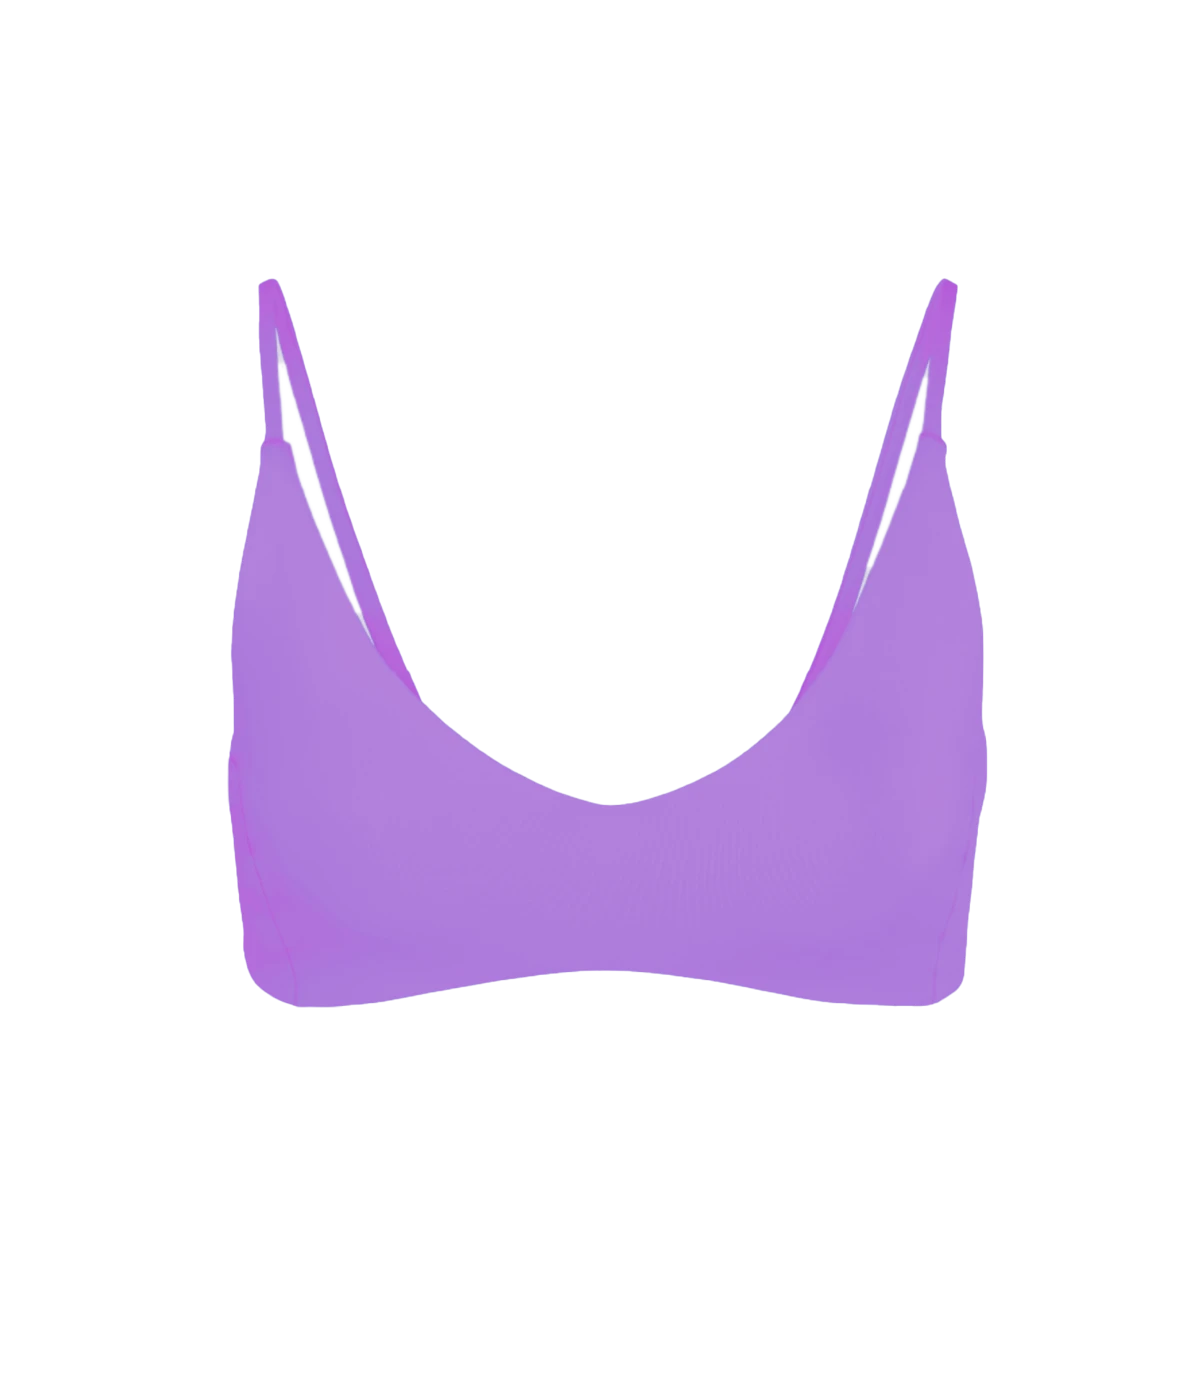 Image of a double lined triangle classic swim top, in a striking purple, classic strappy back. 